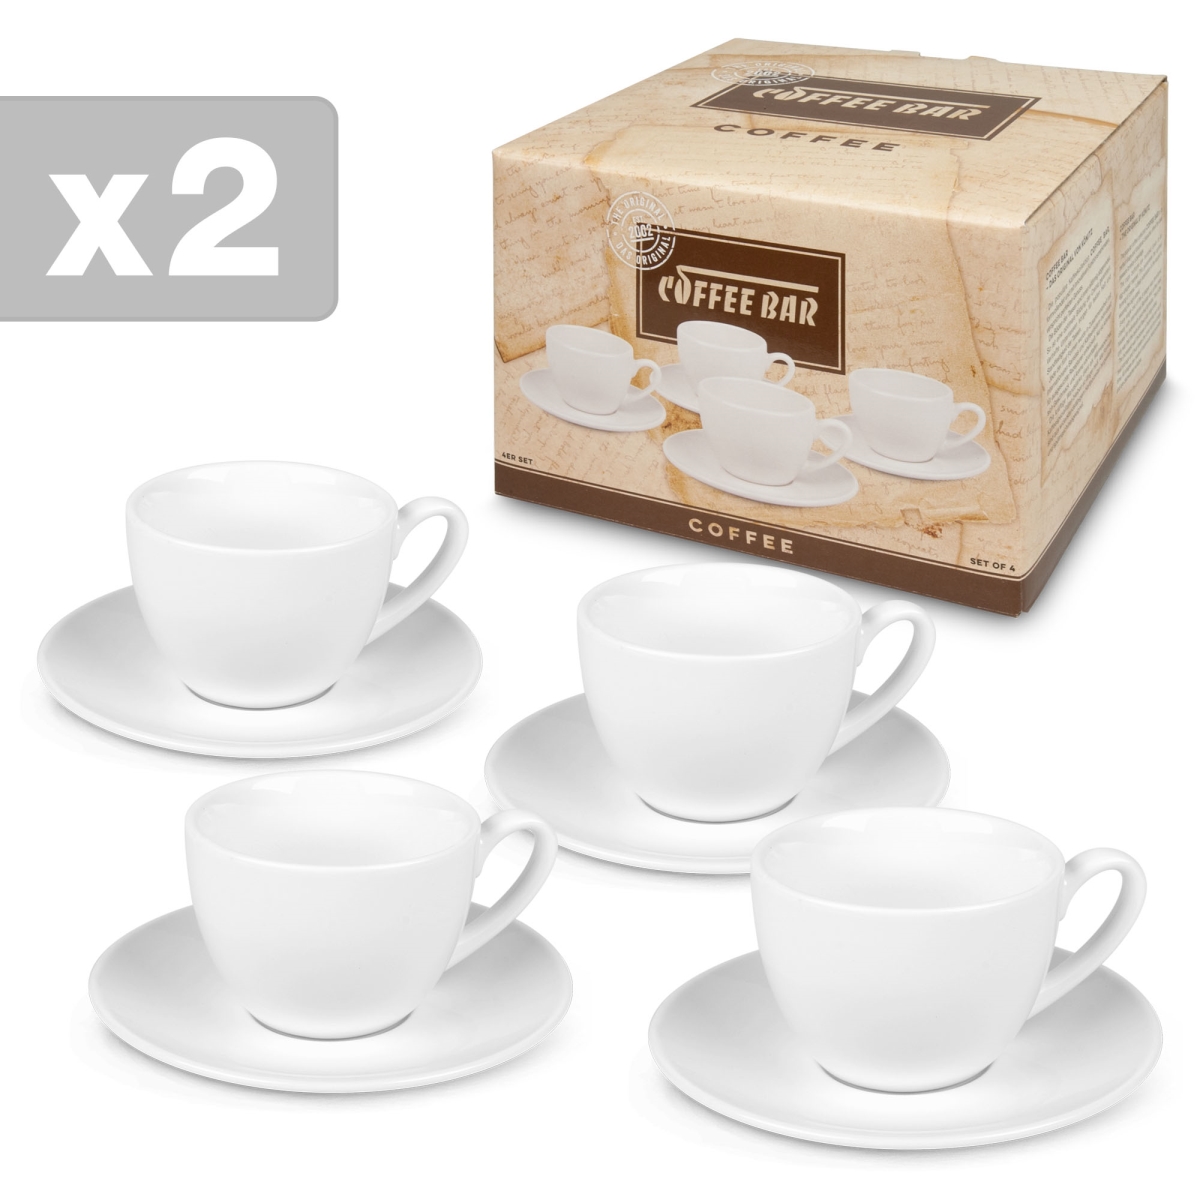 27 5 A08 0001 No-8a Writing On Black Coffee Cups & Saucers, Gift Boxed- Set Of 4